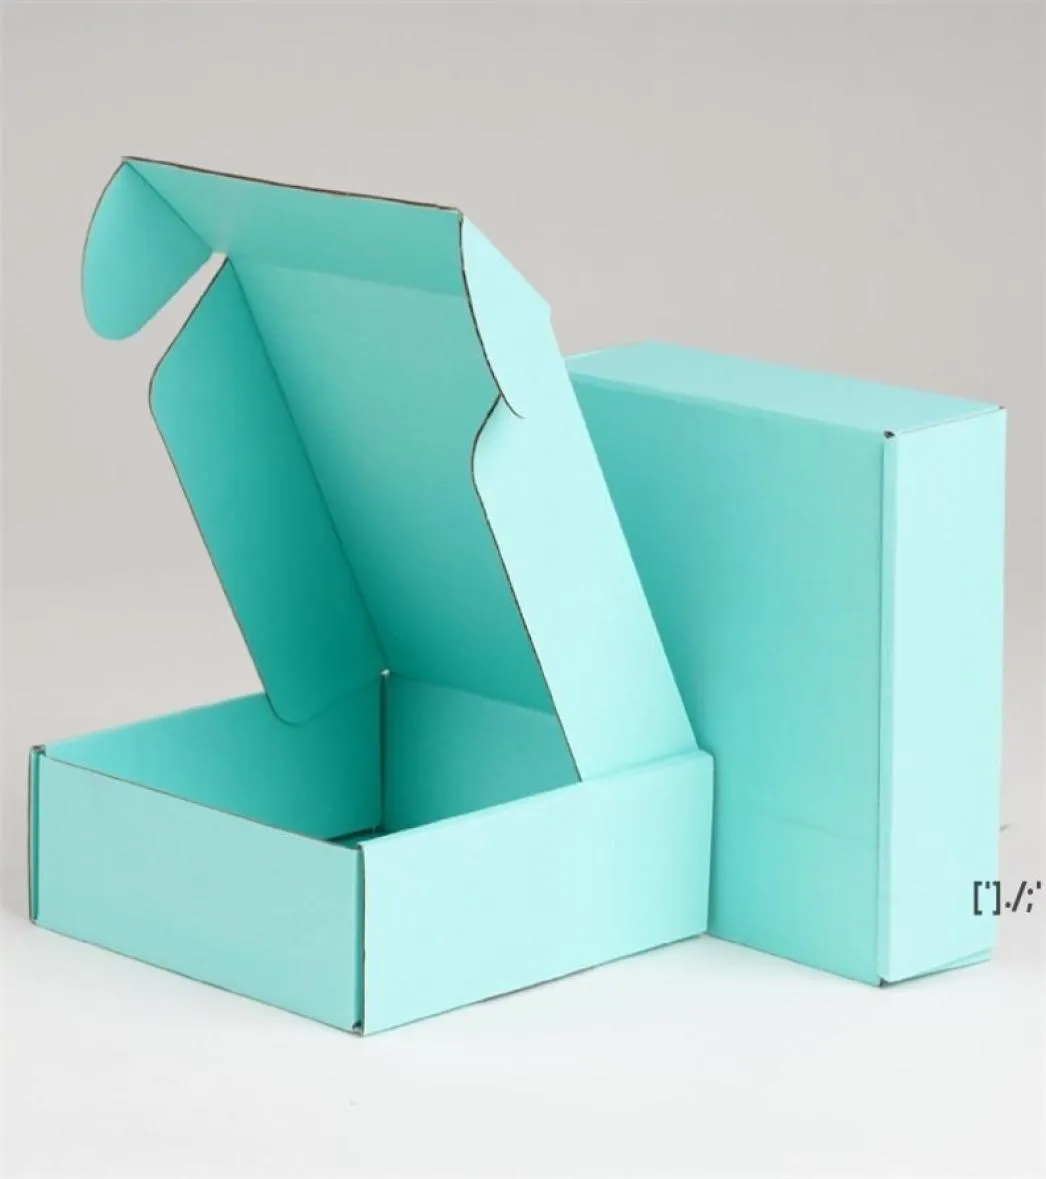 Corrugated Paper Boxes Colored Gift Wrap Packaging Folding Square Packing Jewelry Packing Cardboard Box 15155cm RRA111517342231